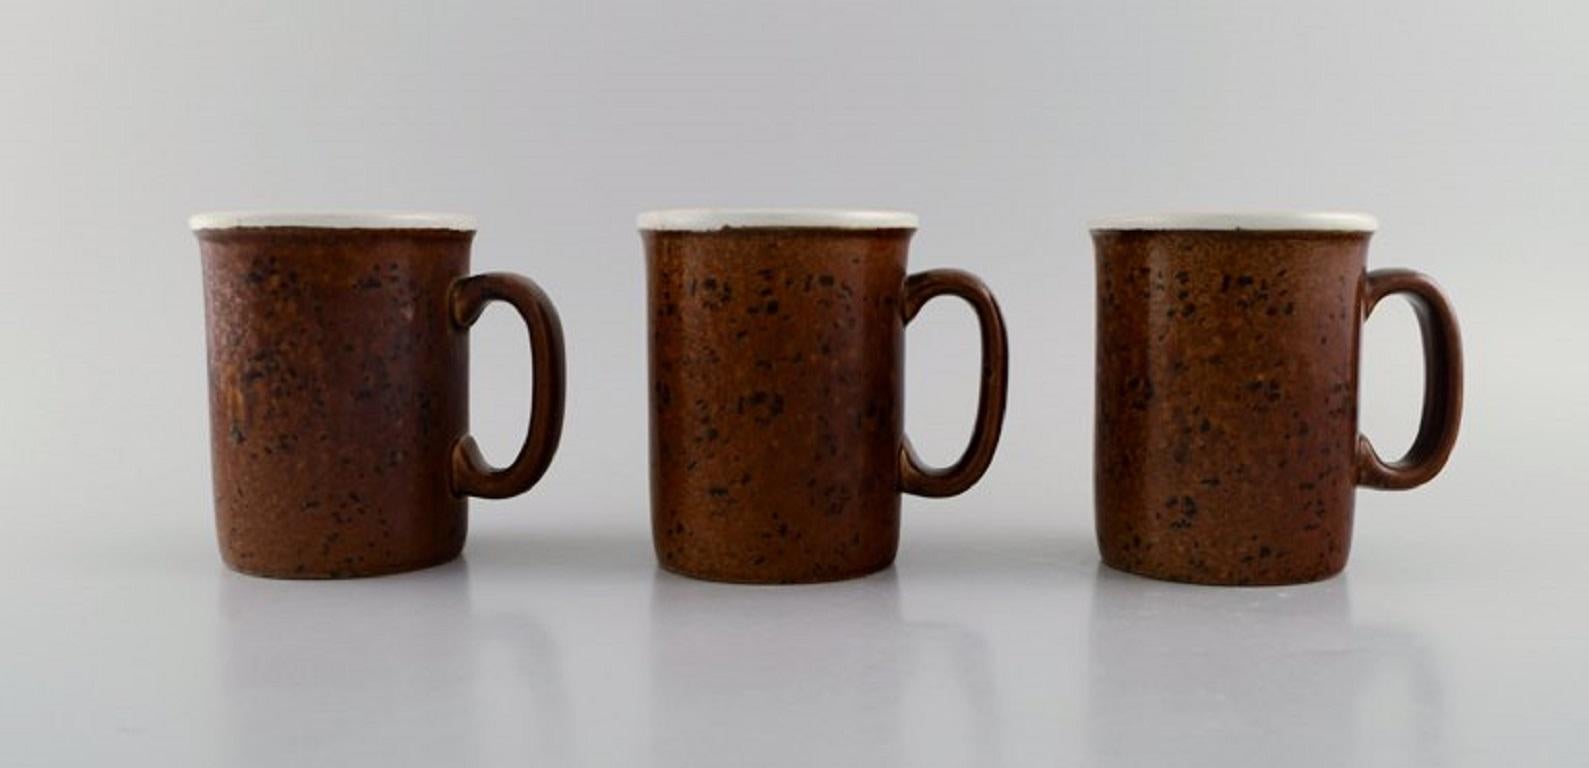 Stig Lindberg for Gustavsberg. 
Five large Coq mugs in glazed stoneware. Beautiful glaze in brown shades. 
Swedish design, 1960s.
Measures: 11.5 x 9.5 cm.
In excellent condition.
Stamped.